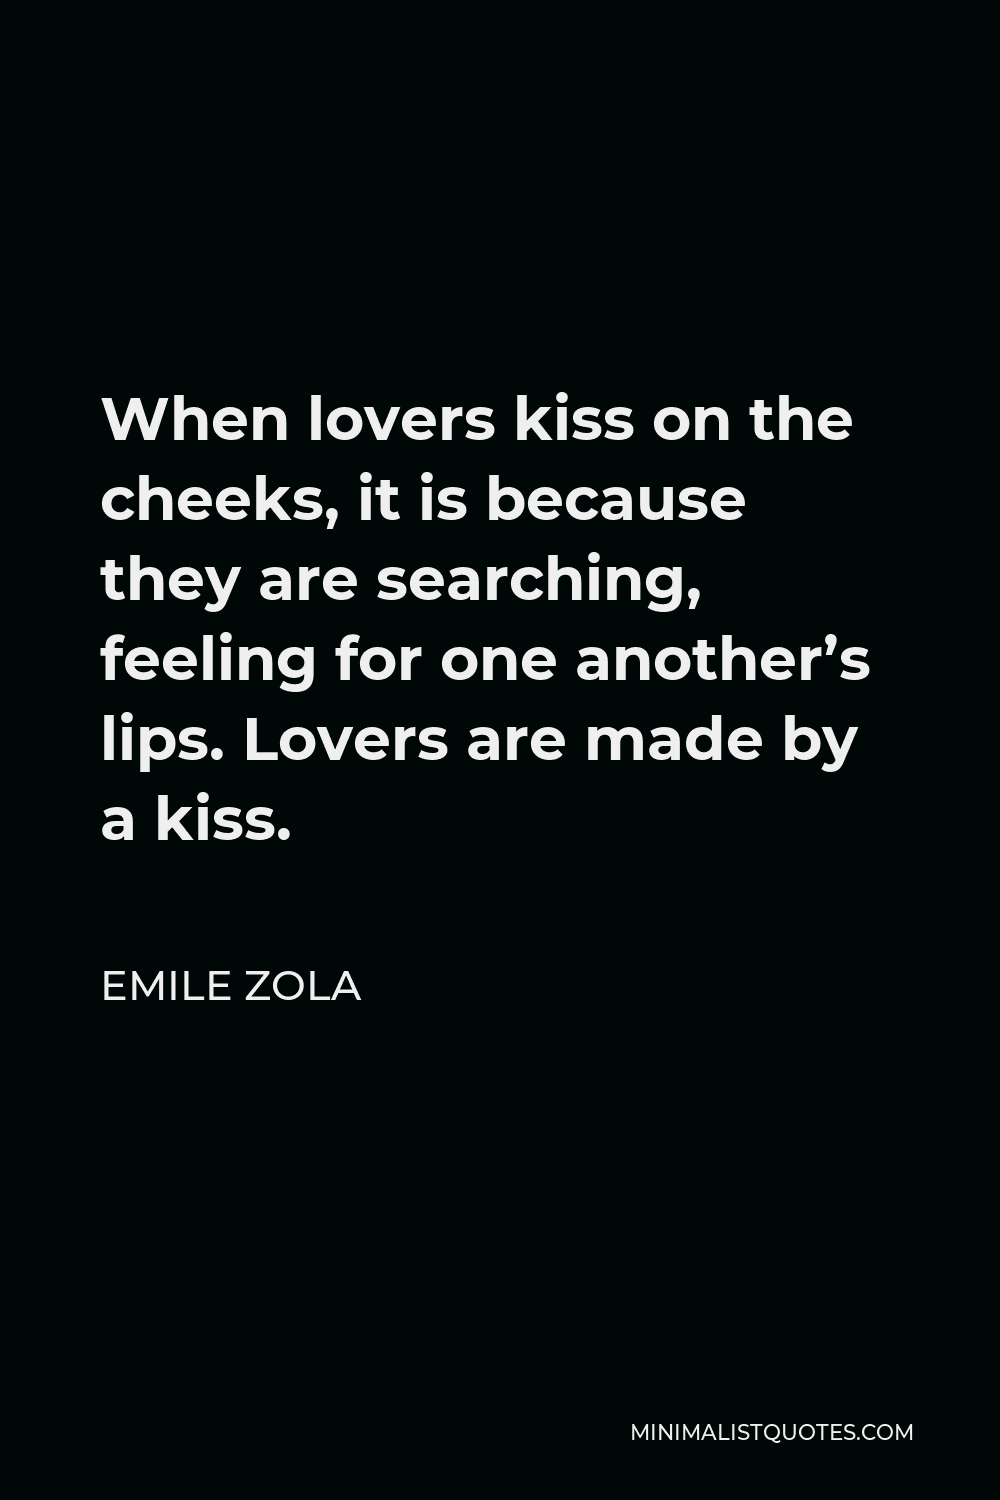 Emile Zola Quote - When lovers kiss on the cheeks, it is because they are searching, feeling for one another’s lips. Lovers are made by a kiss.